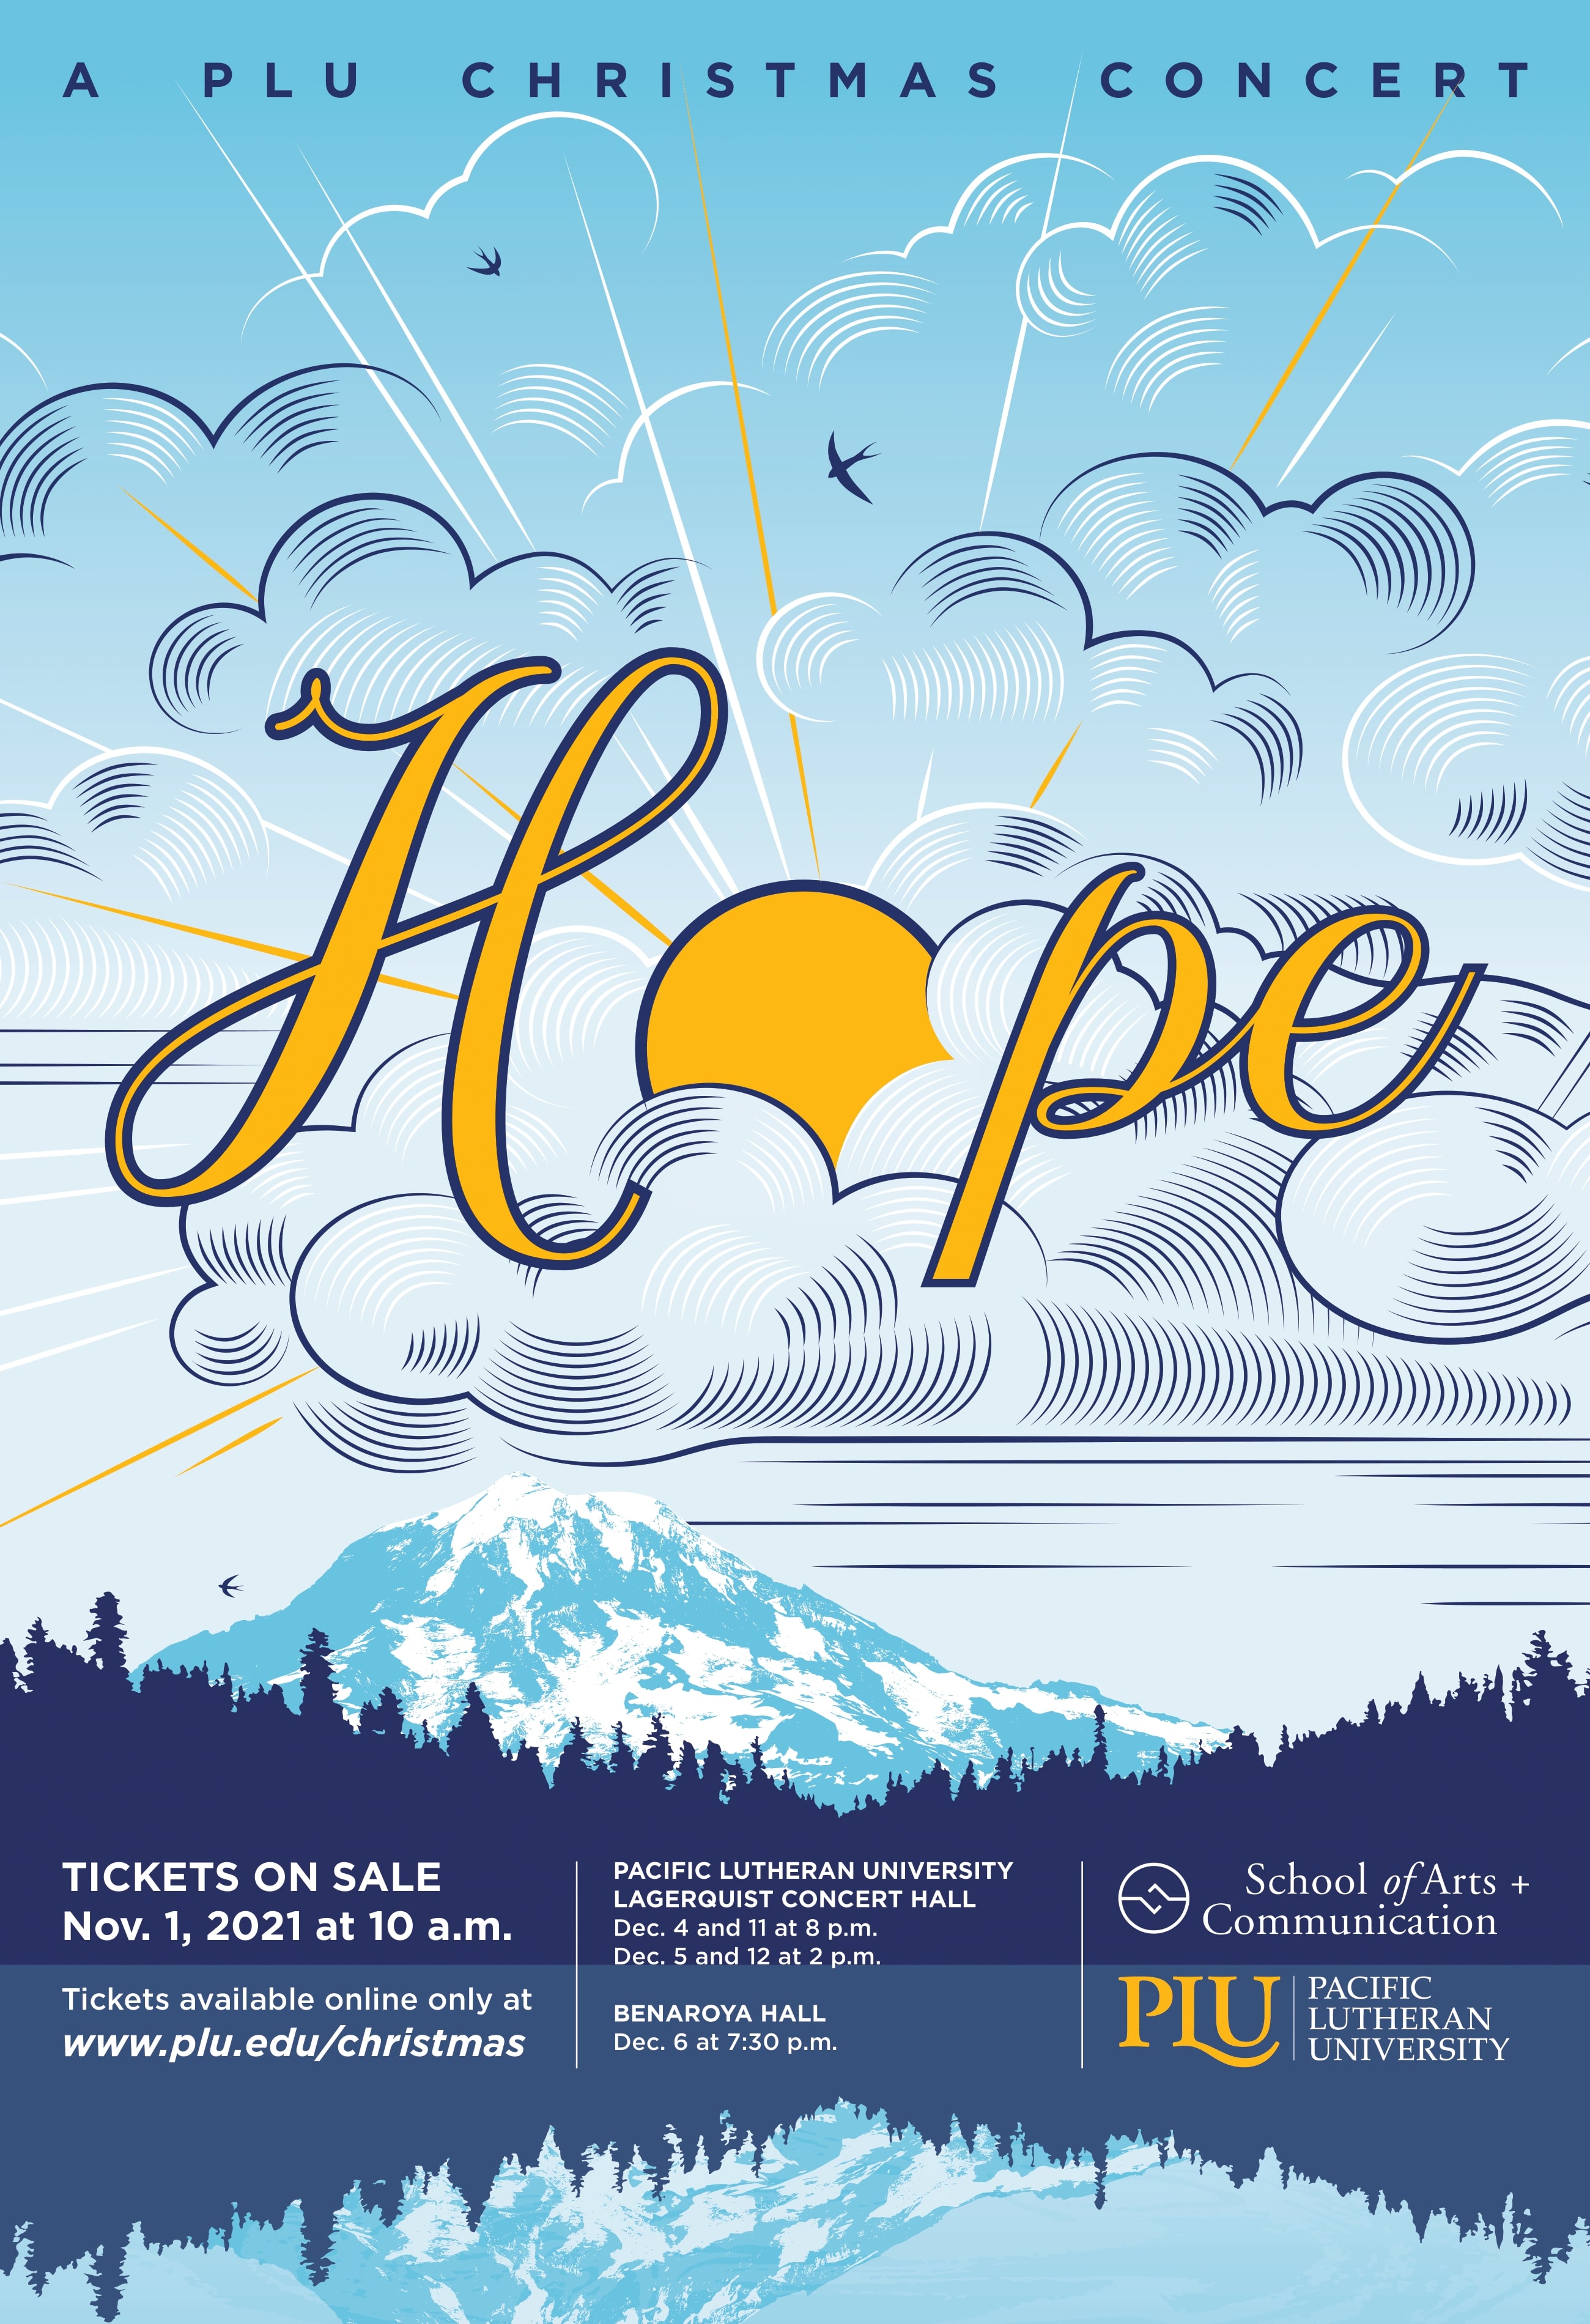 a poster with an illustration of Mt. Rainier, trees and a lake promoting Pacific Lutheran University's 2021 Christmas concerts